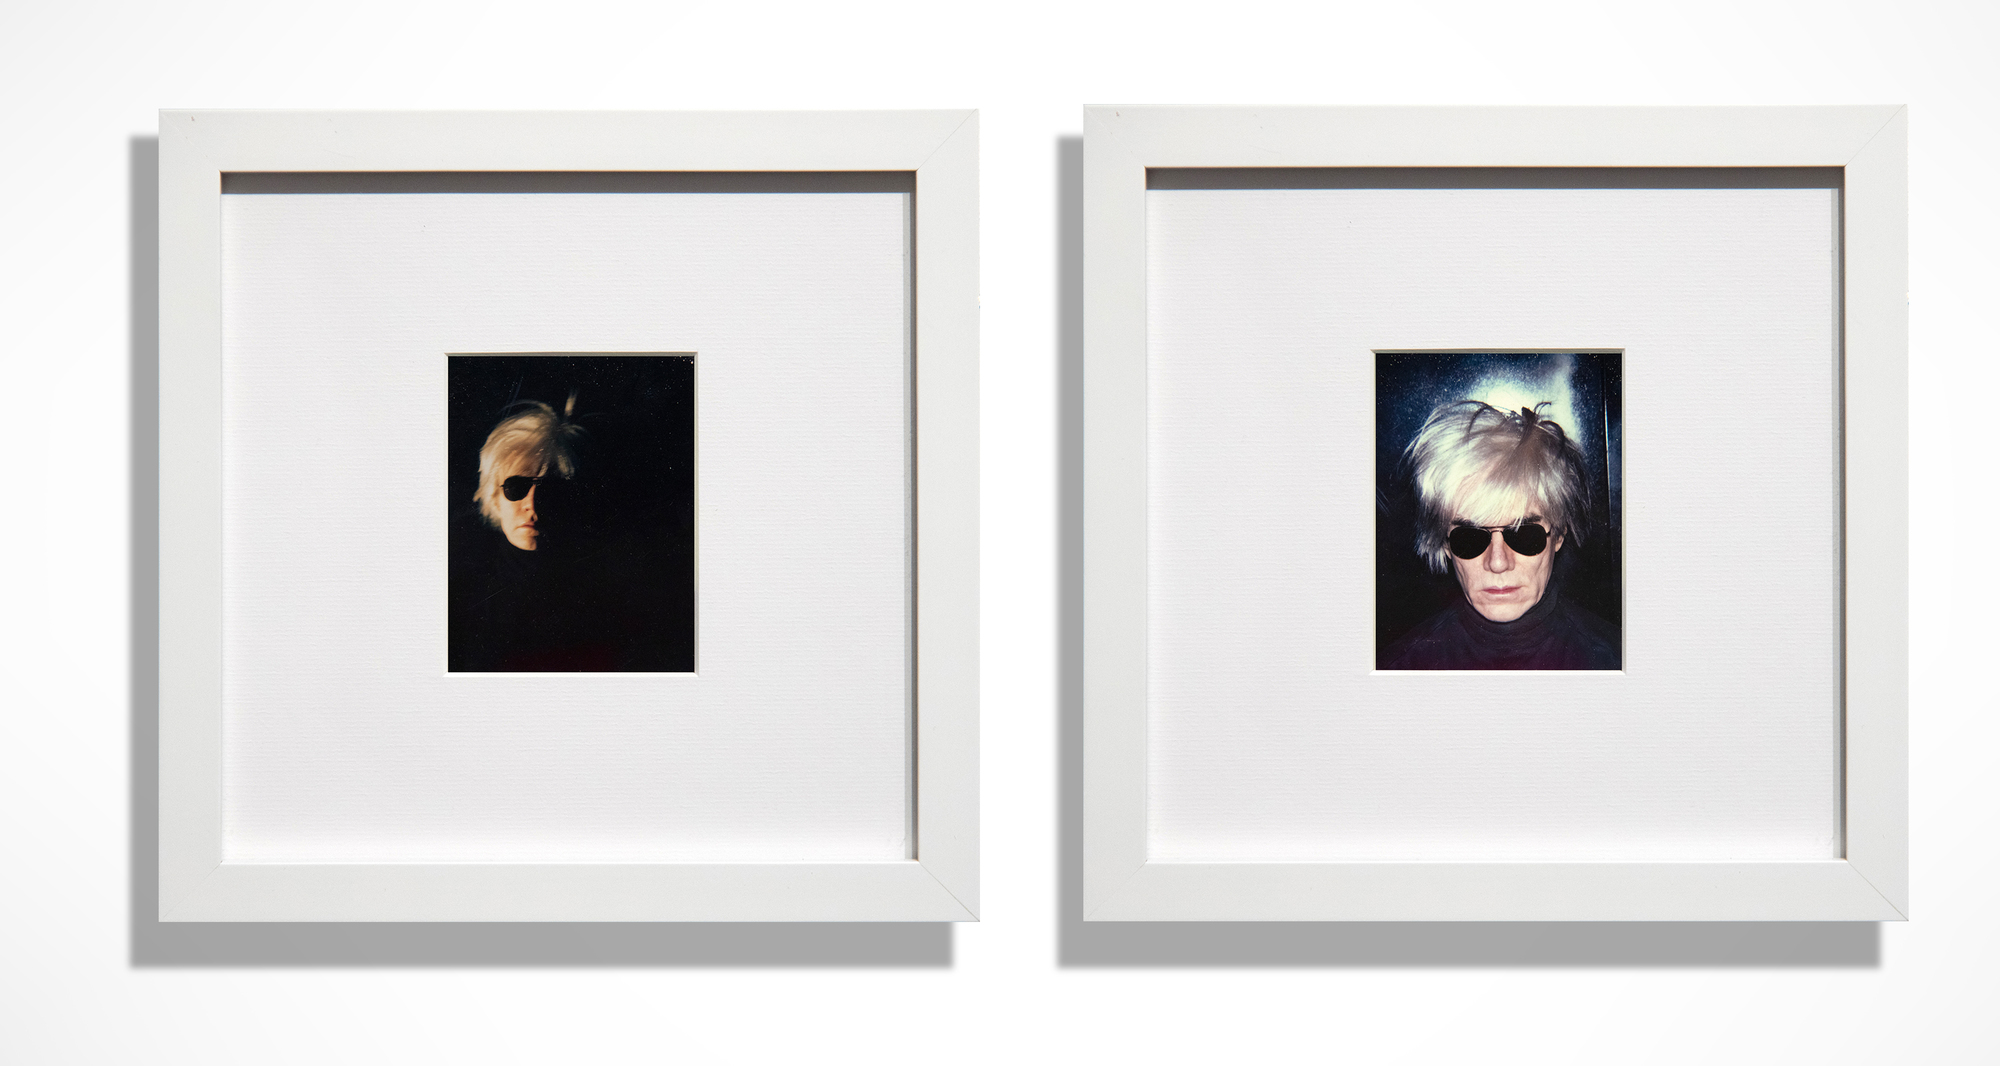 Beginning in 1963, with a silkscreen derived from a photo booth strip, Warhol repeatedly explored his likeness, culminating with the iconic "Fright Wig" image. Essential to his depiction of celebrities and self-representation, the Polaroid photograph played a crucial role in his work and our perceptions of his massive contribution to post-war art in America. The two images presented, dark and spooky, are beautifully crafted, well-staged portraits. Enveloped in a moody ambiance that eviscerates his body, these self-portraits depict Andy clad in this iconic wig and dark aviator sunglasses, set against a backdrop so deeply shadowed that his head seems to float in a void of darkness. Warhol loved role-playing, and here it is in spades!